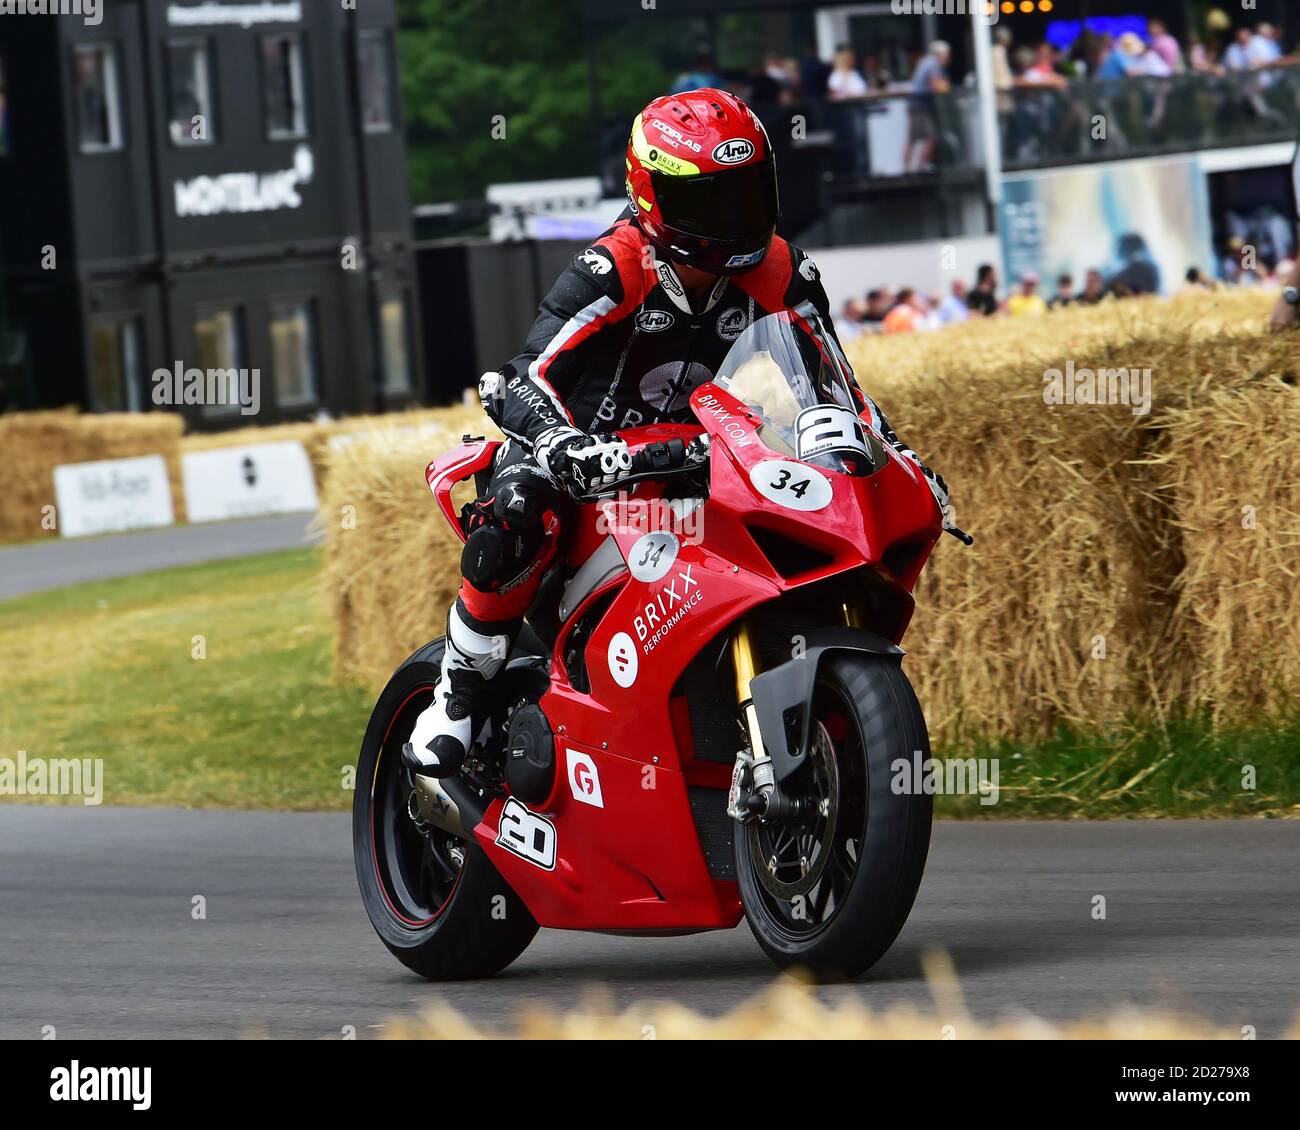 Silvain Barrier, Ducati Panigale V4R, Modern Racing Motorcycles, Goodwood Festival of Speed, Speed Kings, Motorsport's Record Breakers, Goodwood, July Stock Photo